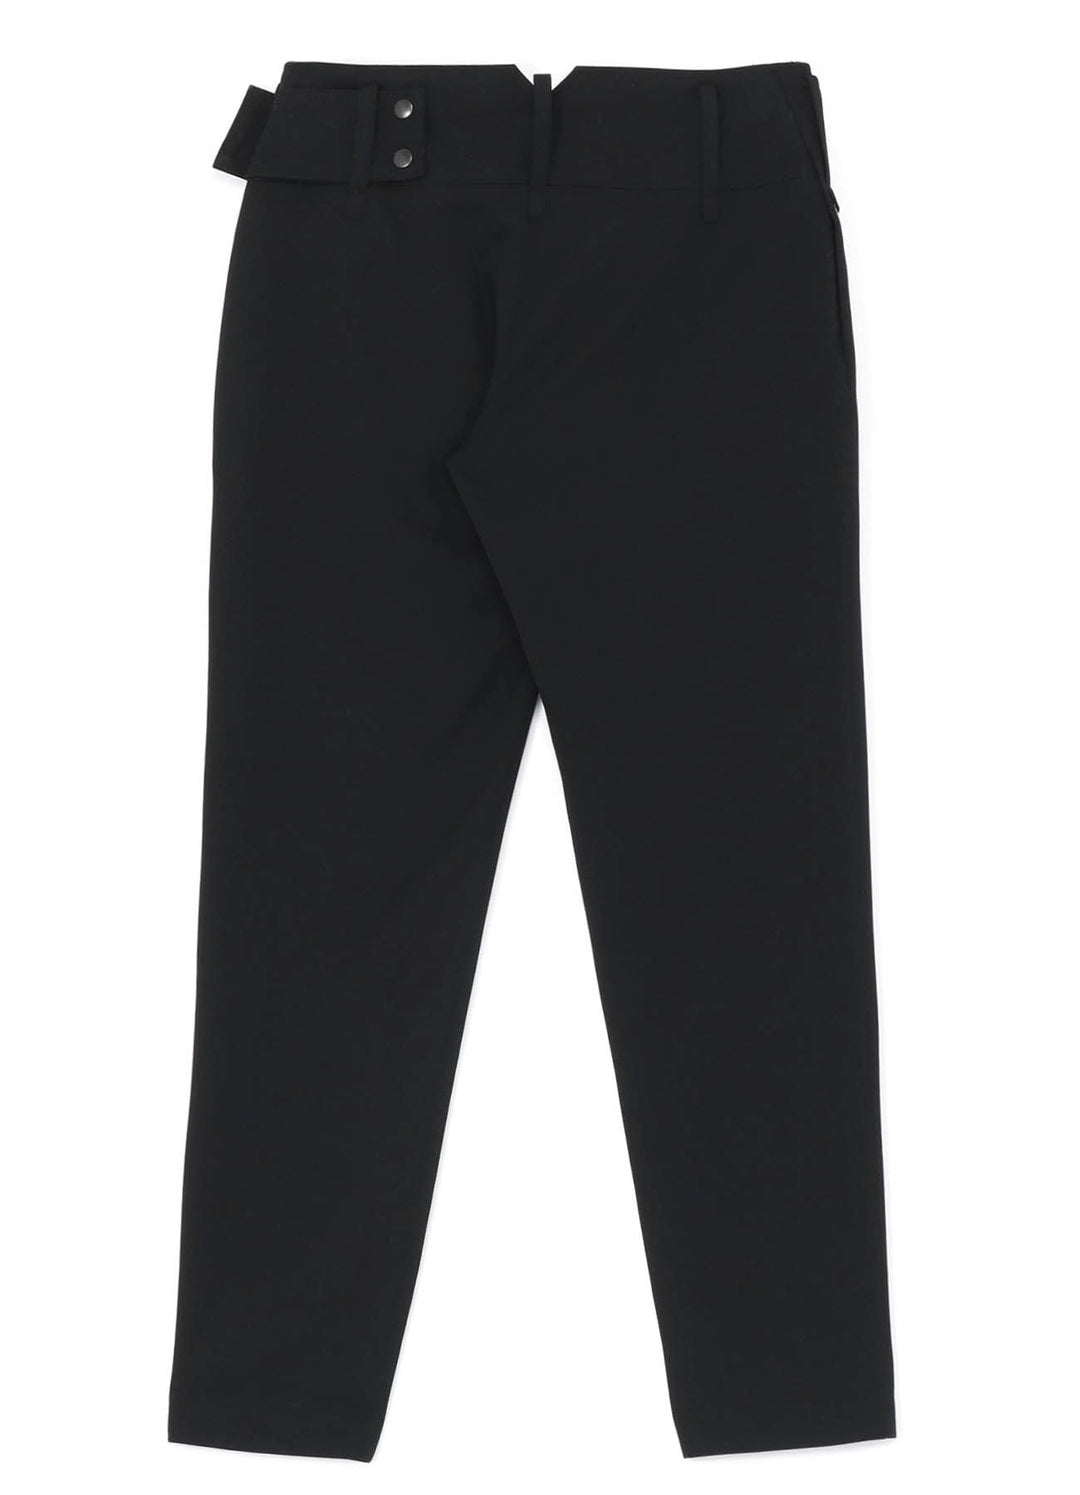 Low-Rise Belted Pants